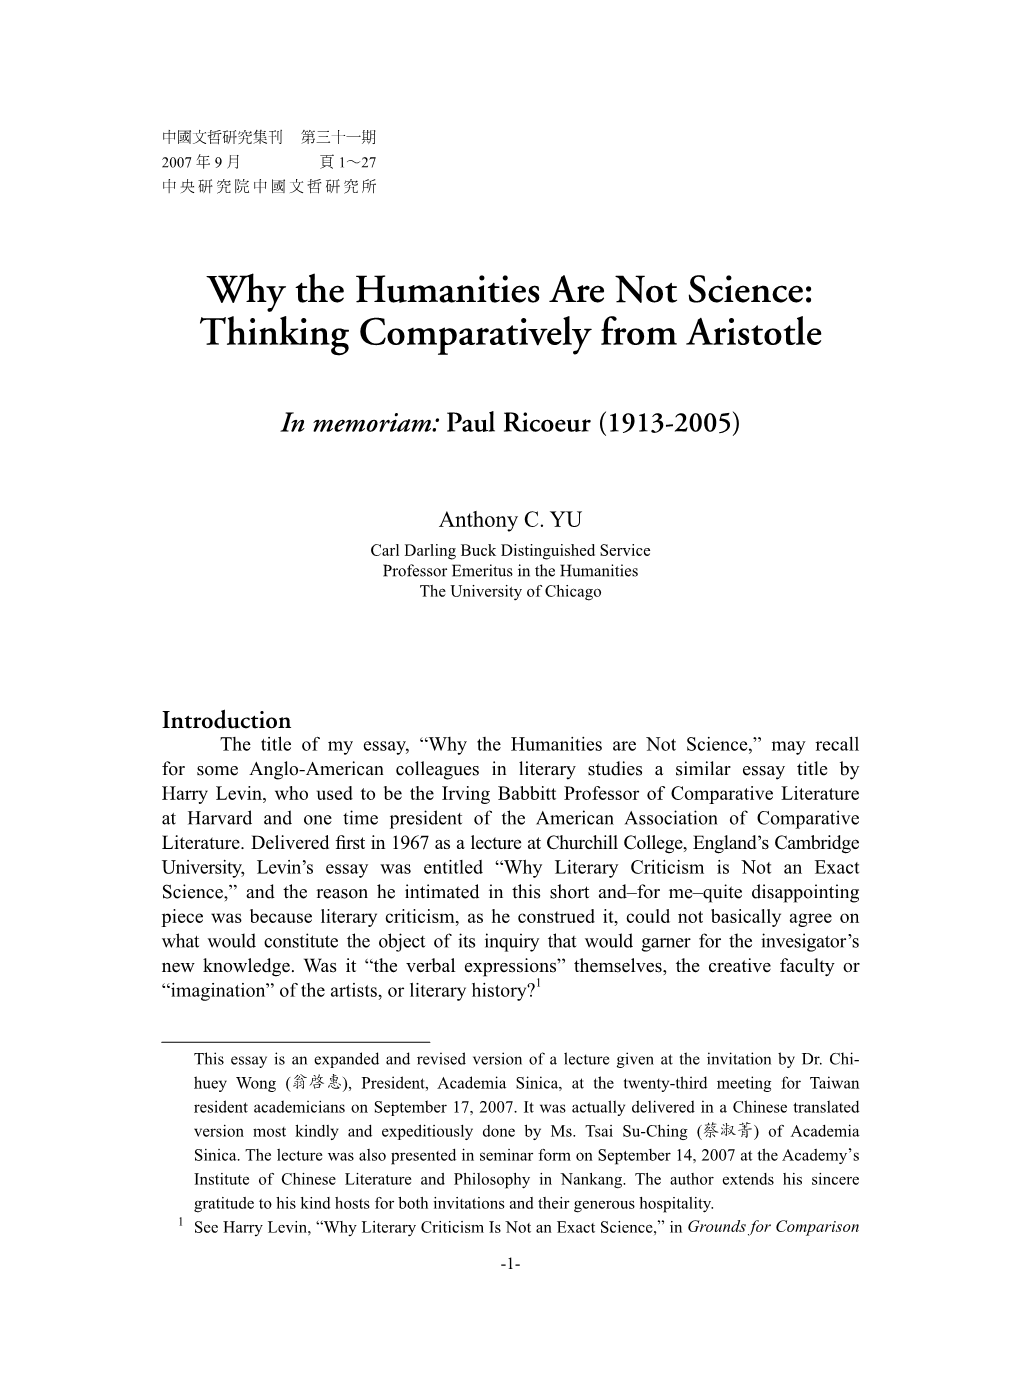 Why the Humanities Are Not Science: Thinking Comparatively from Aristotle